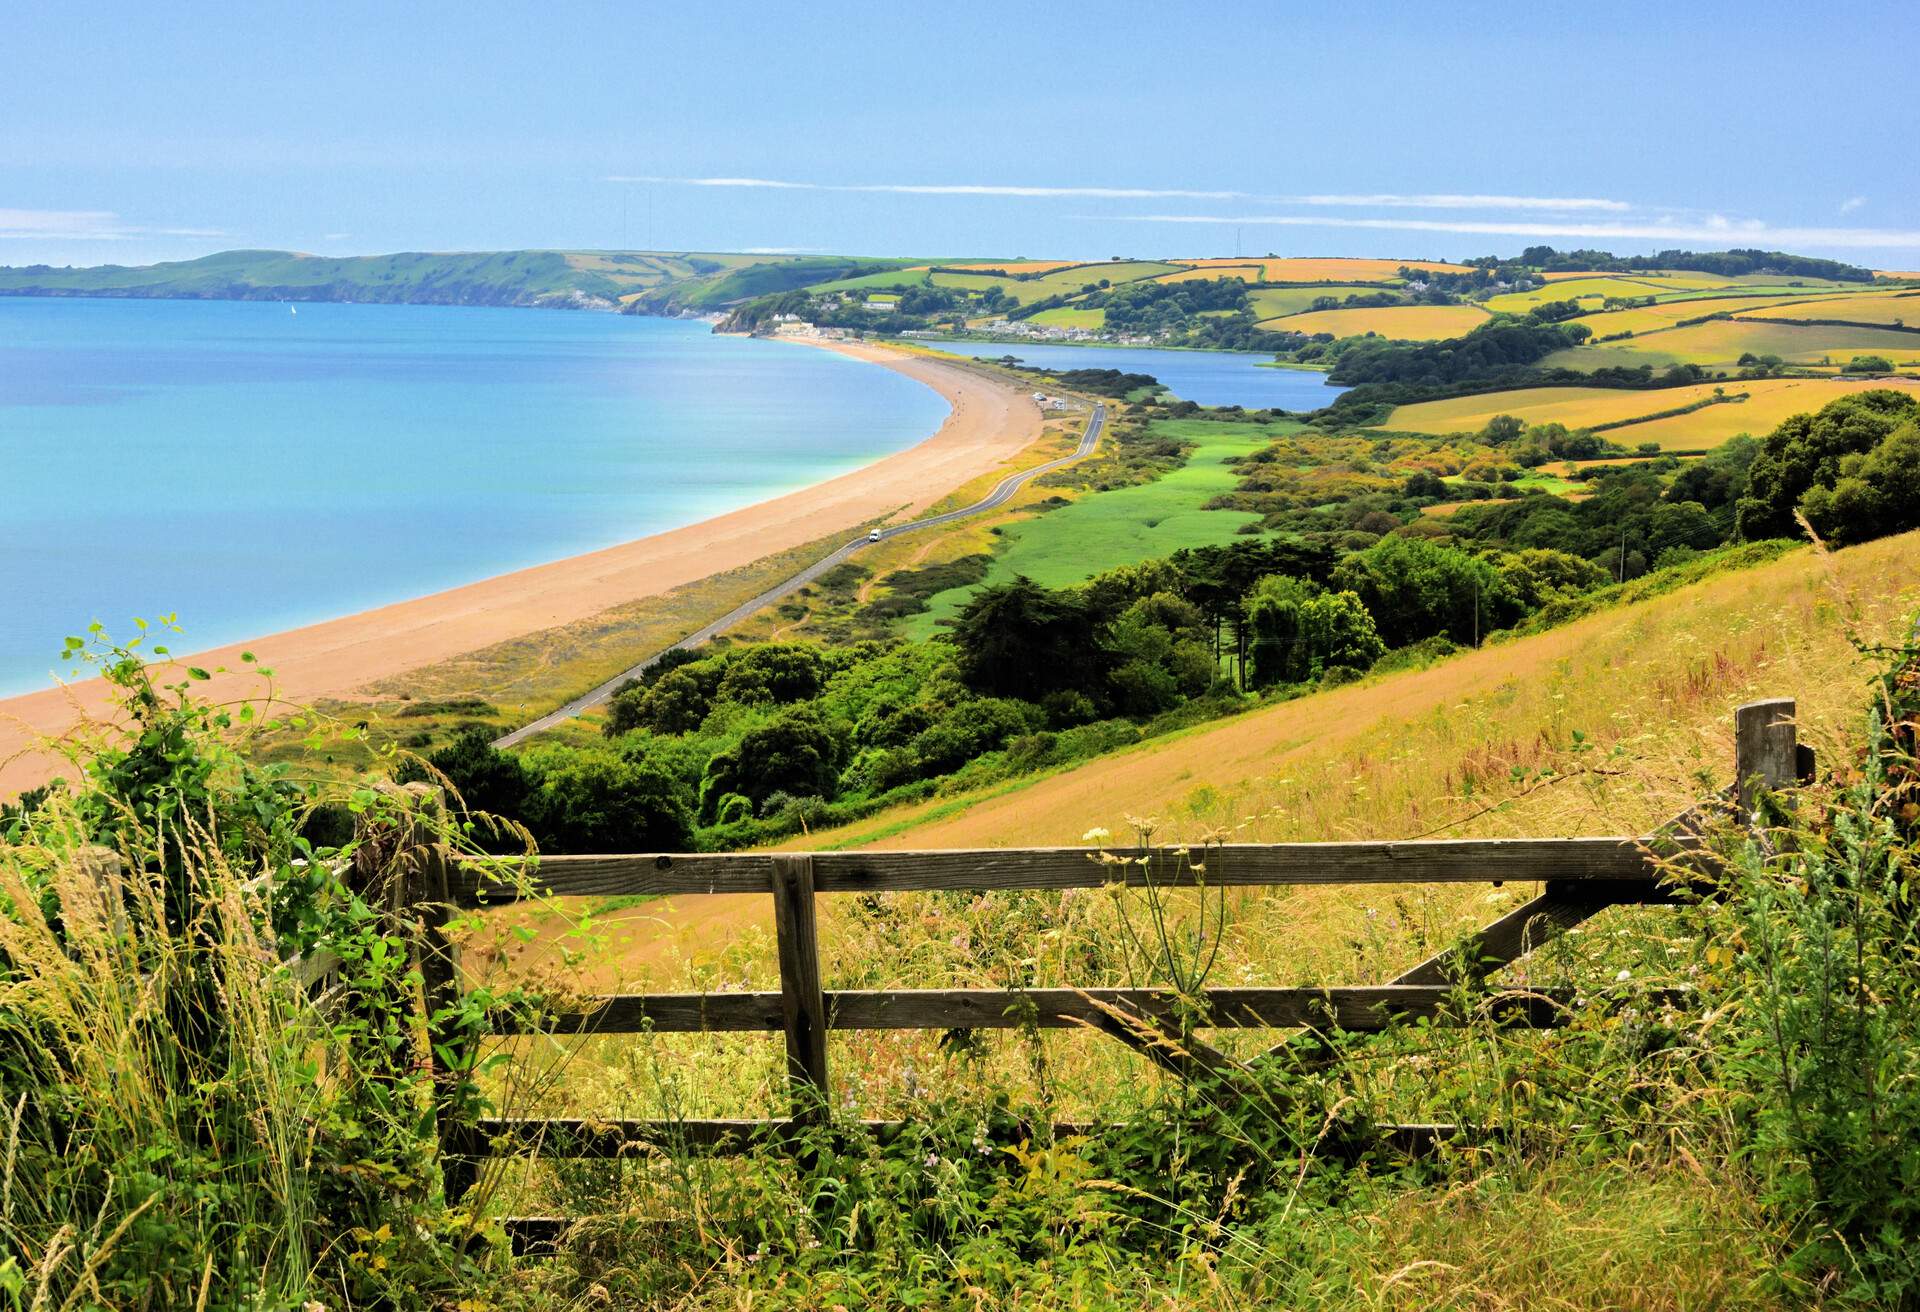 A view along the Devon coast at Slapton Sands, with The Ley at Torcross